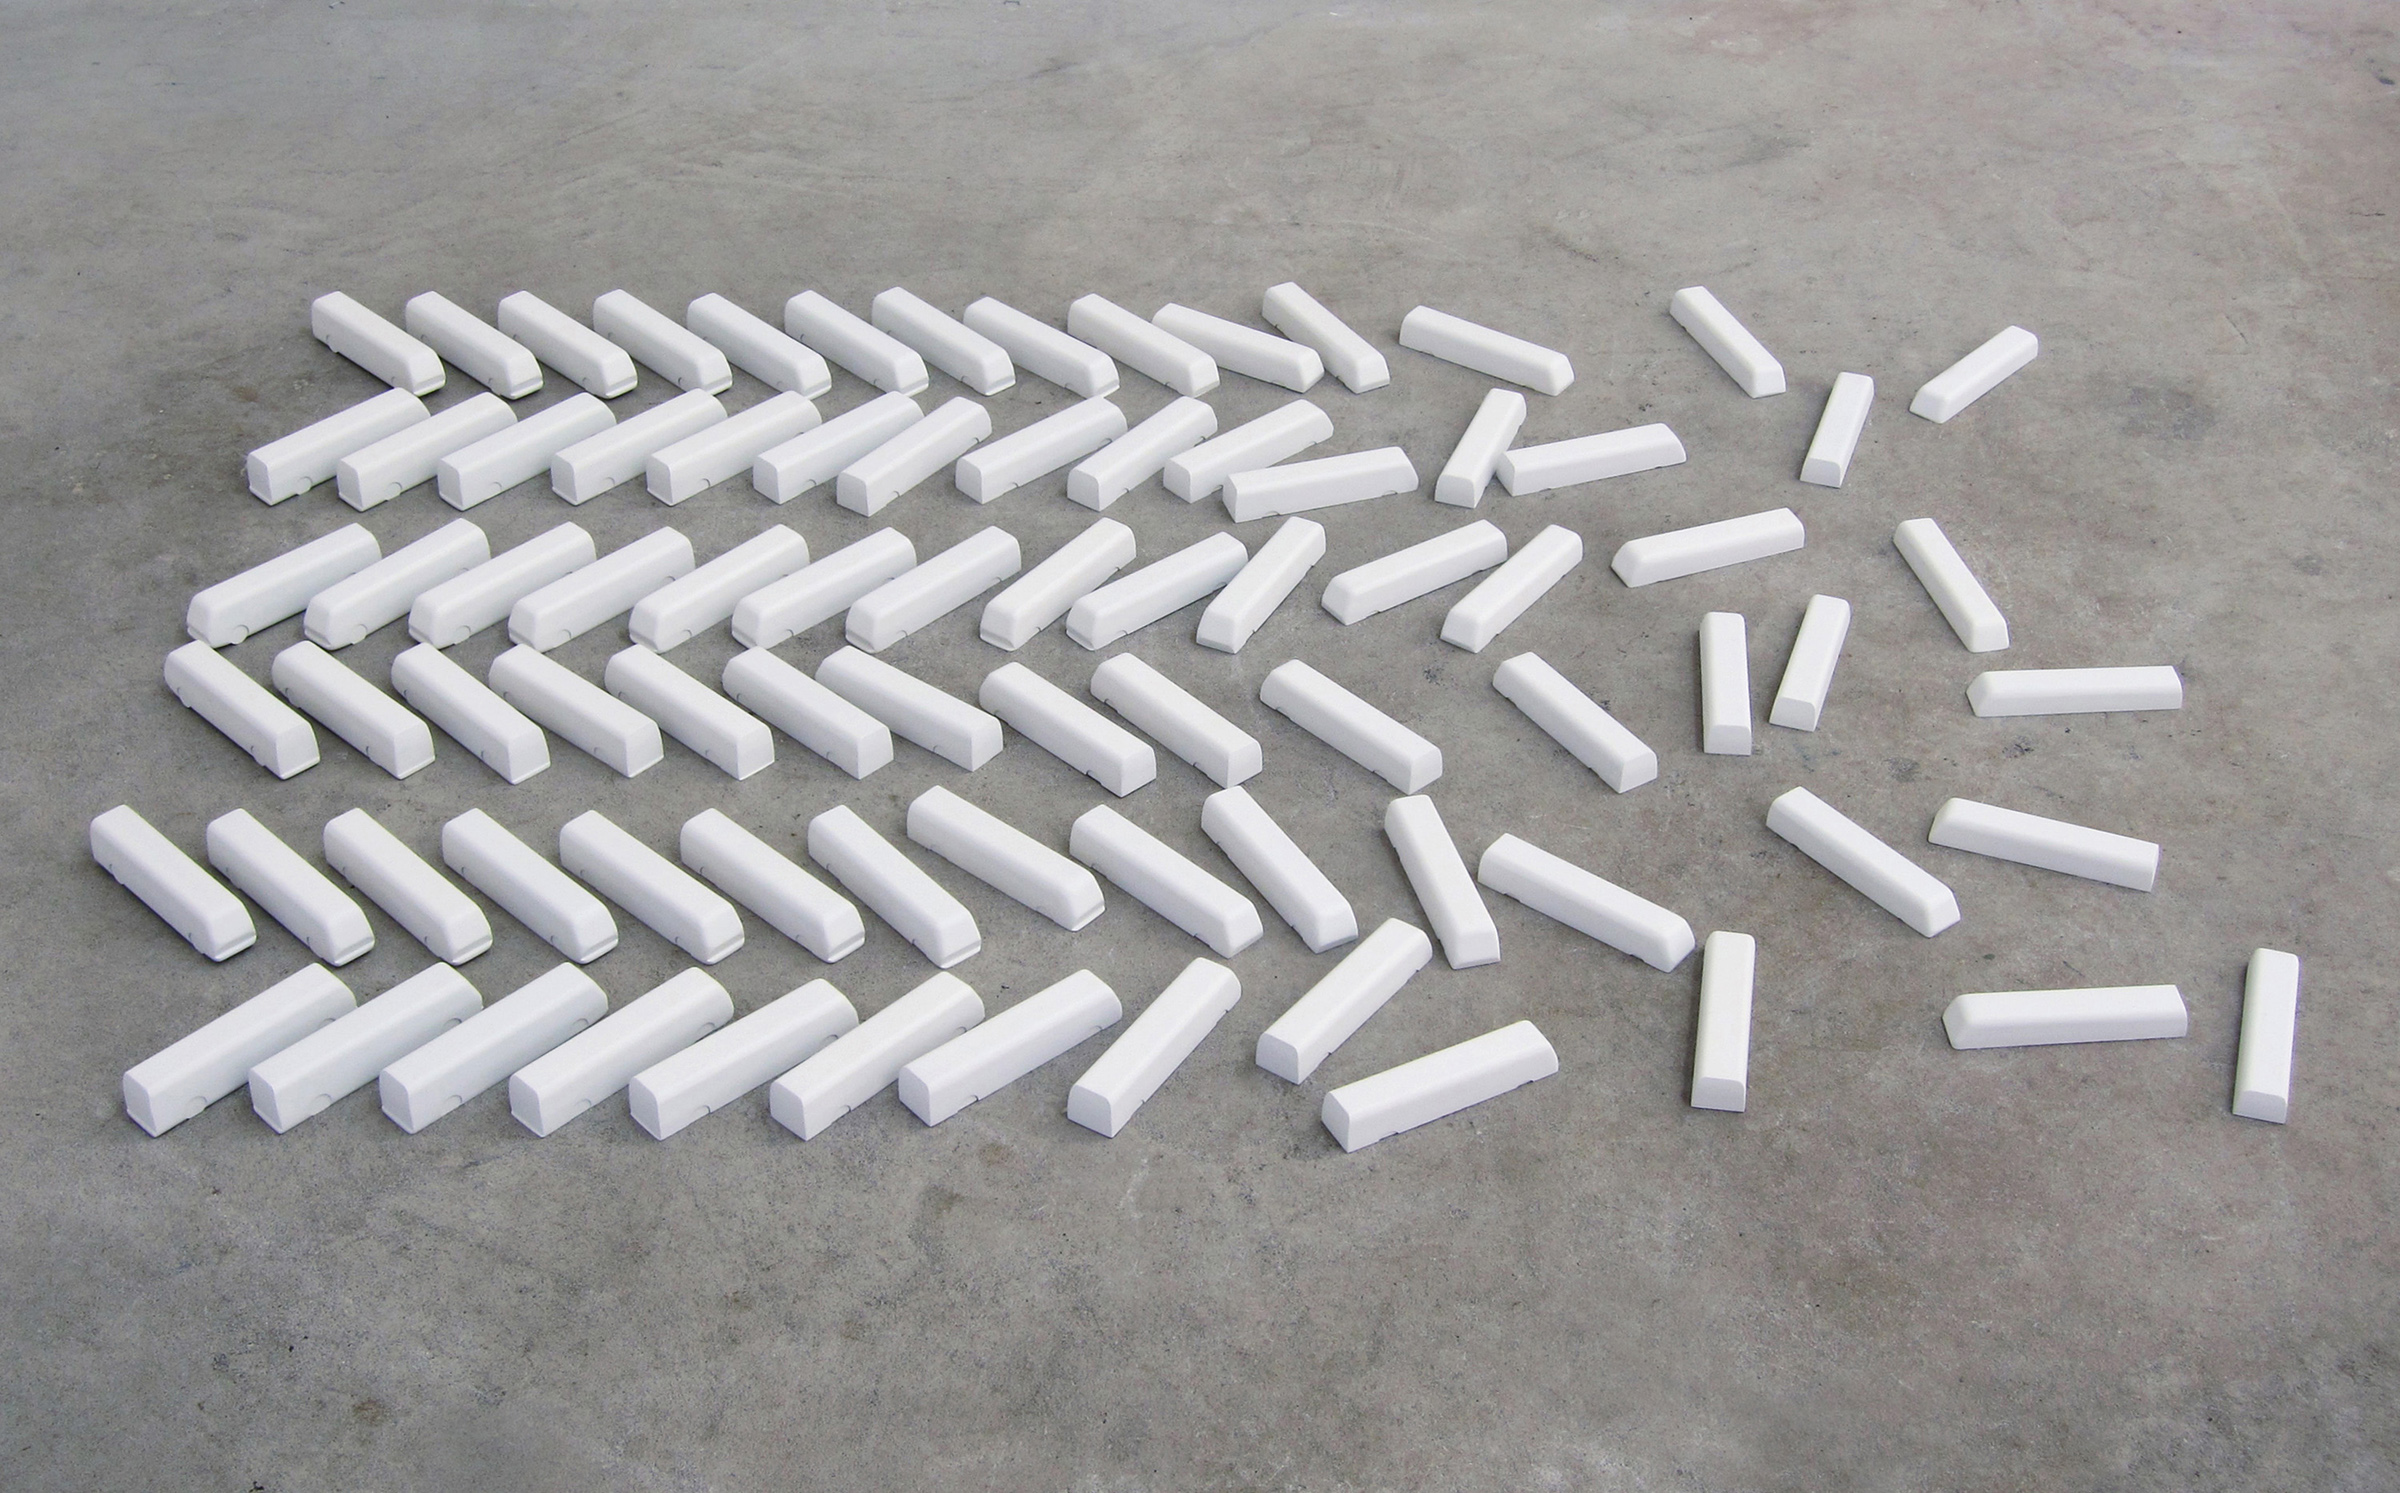 Nathaniel Robinson, Fleet, 2011, wood and paint, 1h x 46w x 35d in.